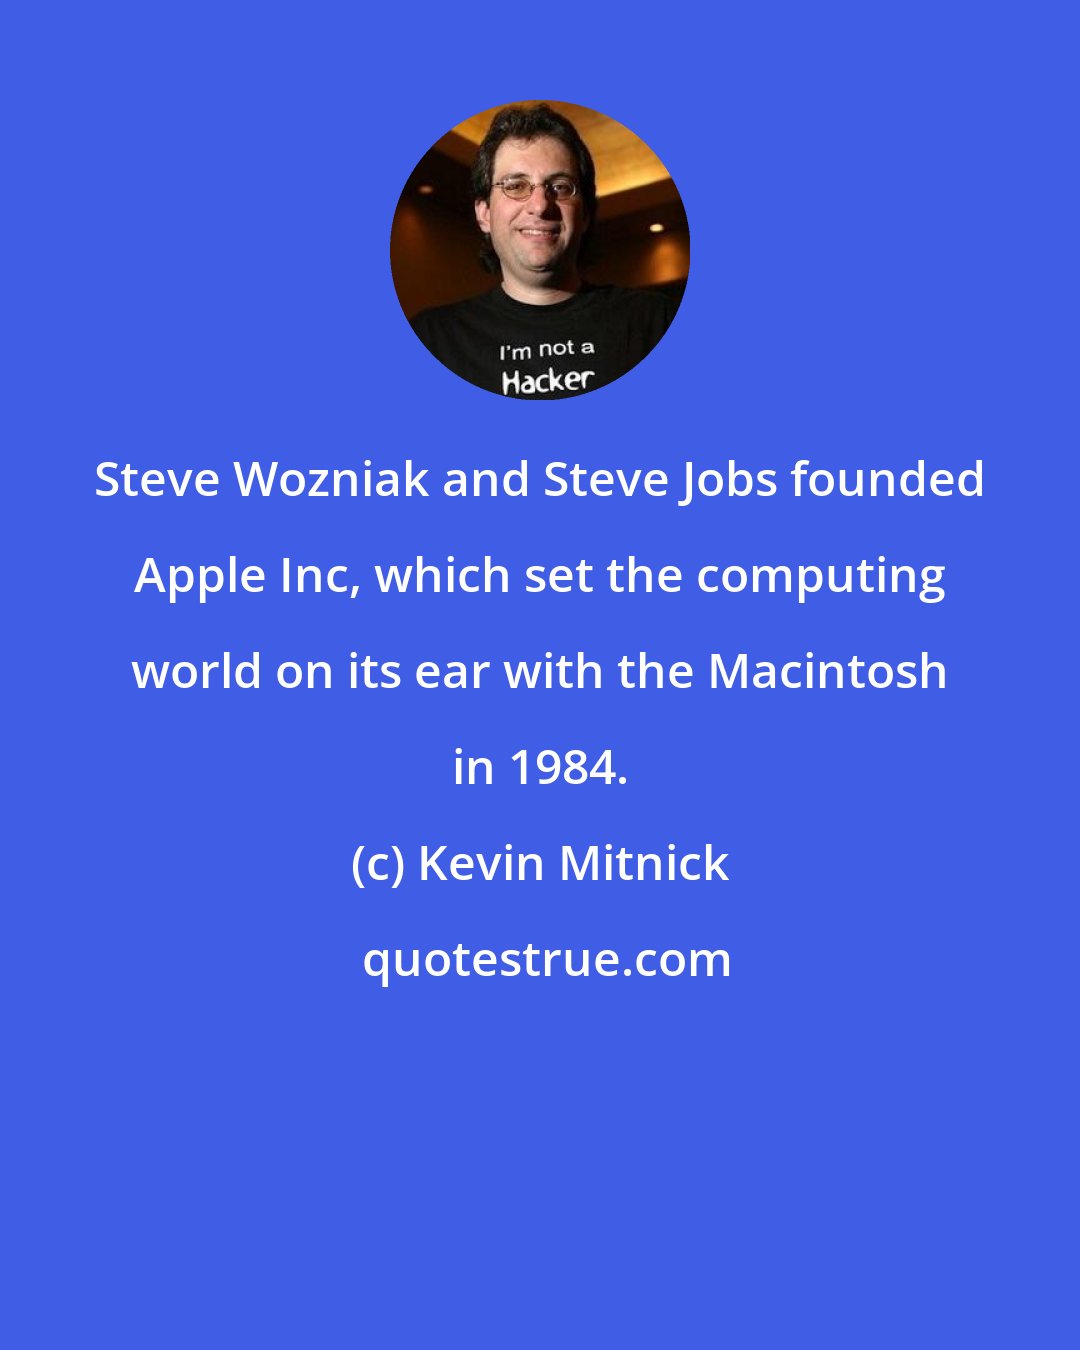 Kevin Mitnick: Steve Wozniak and Steve Jobs founded Apple Inc, which set the computing world on its ear with the Macintosh in 1984.